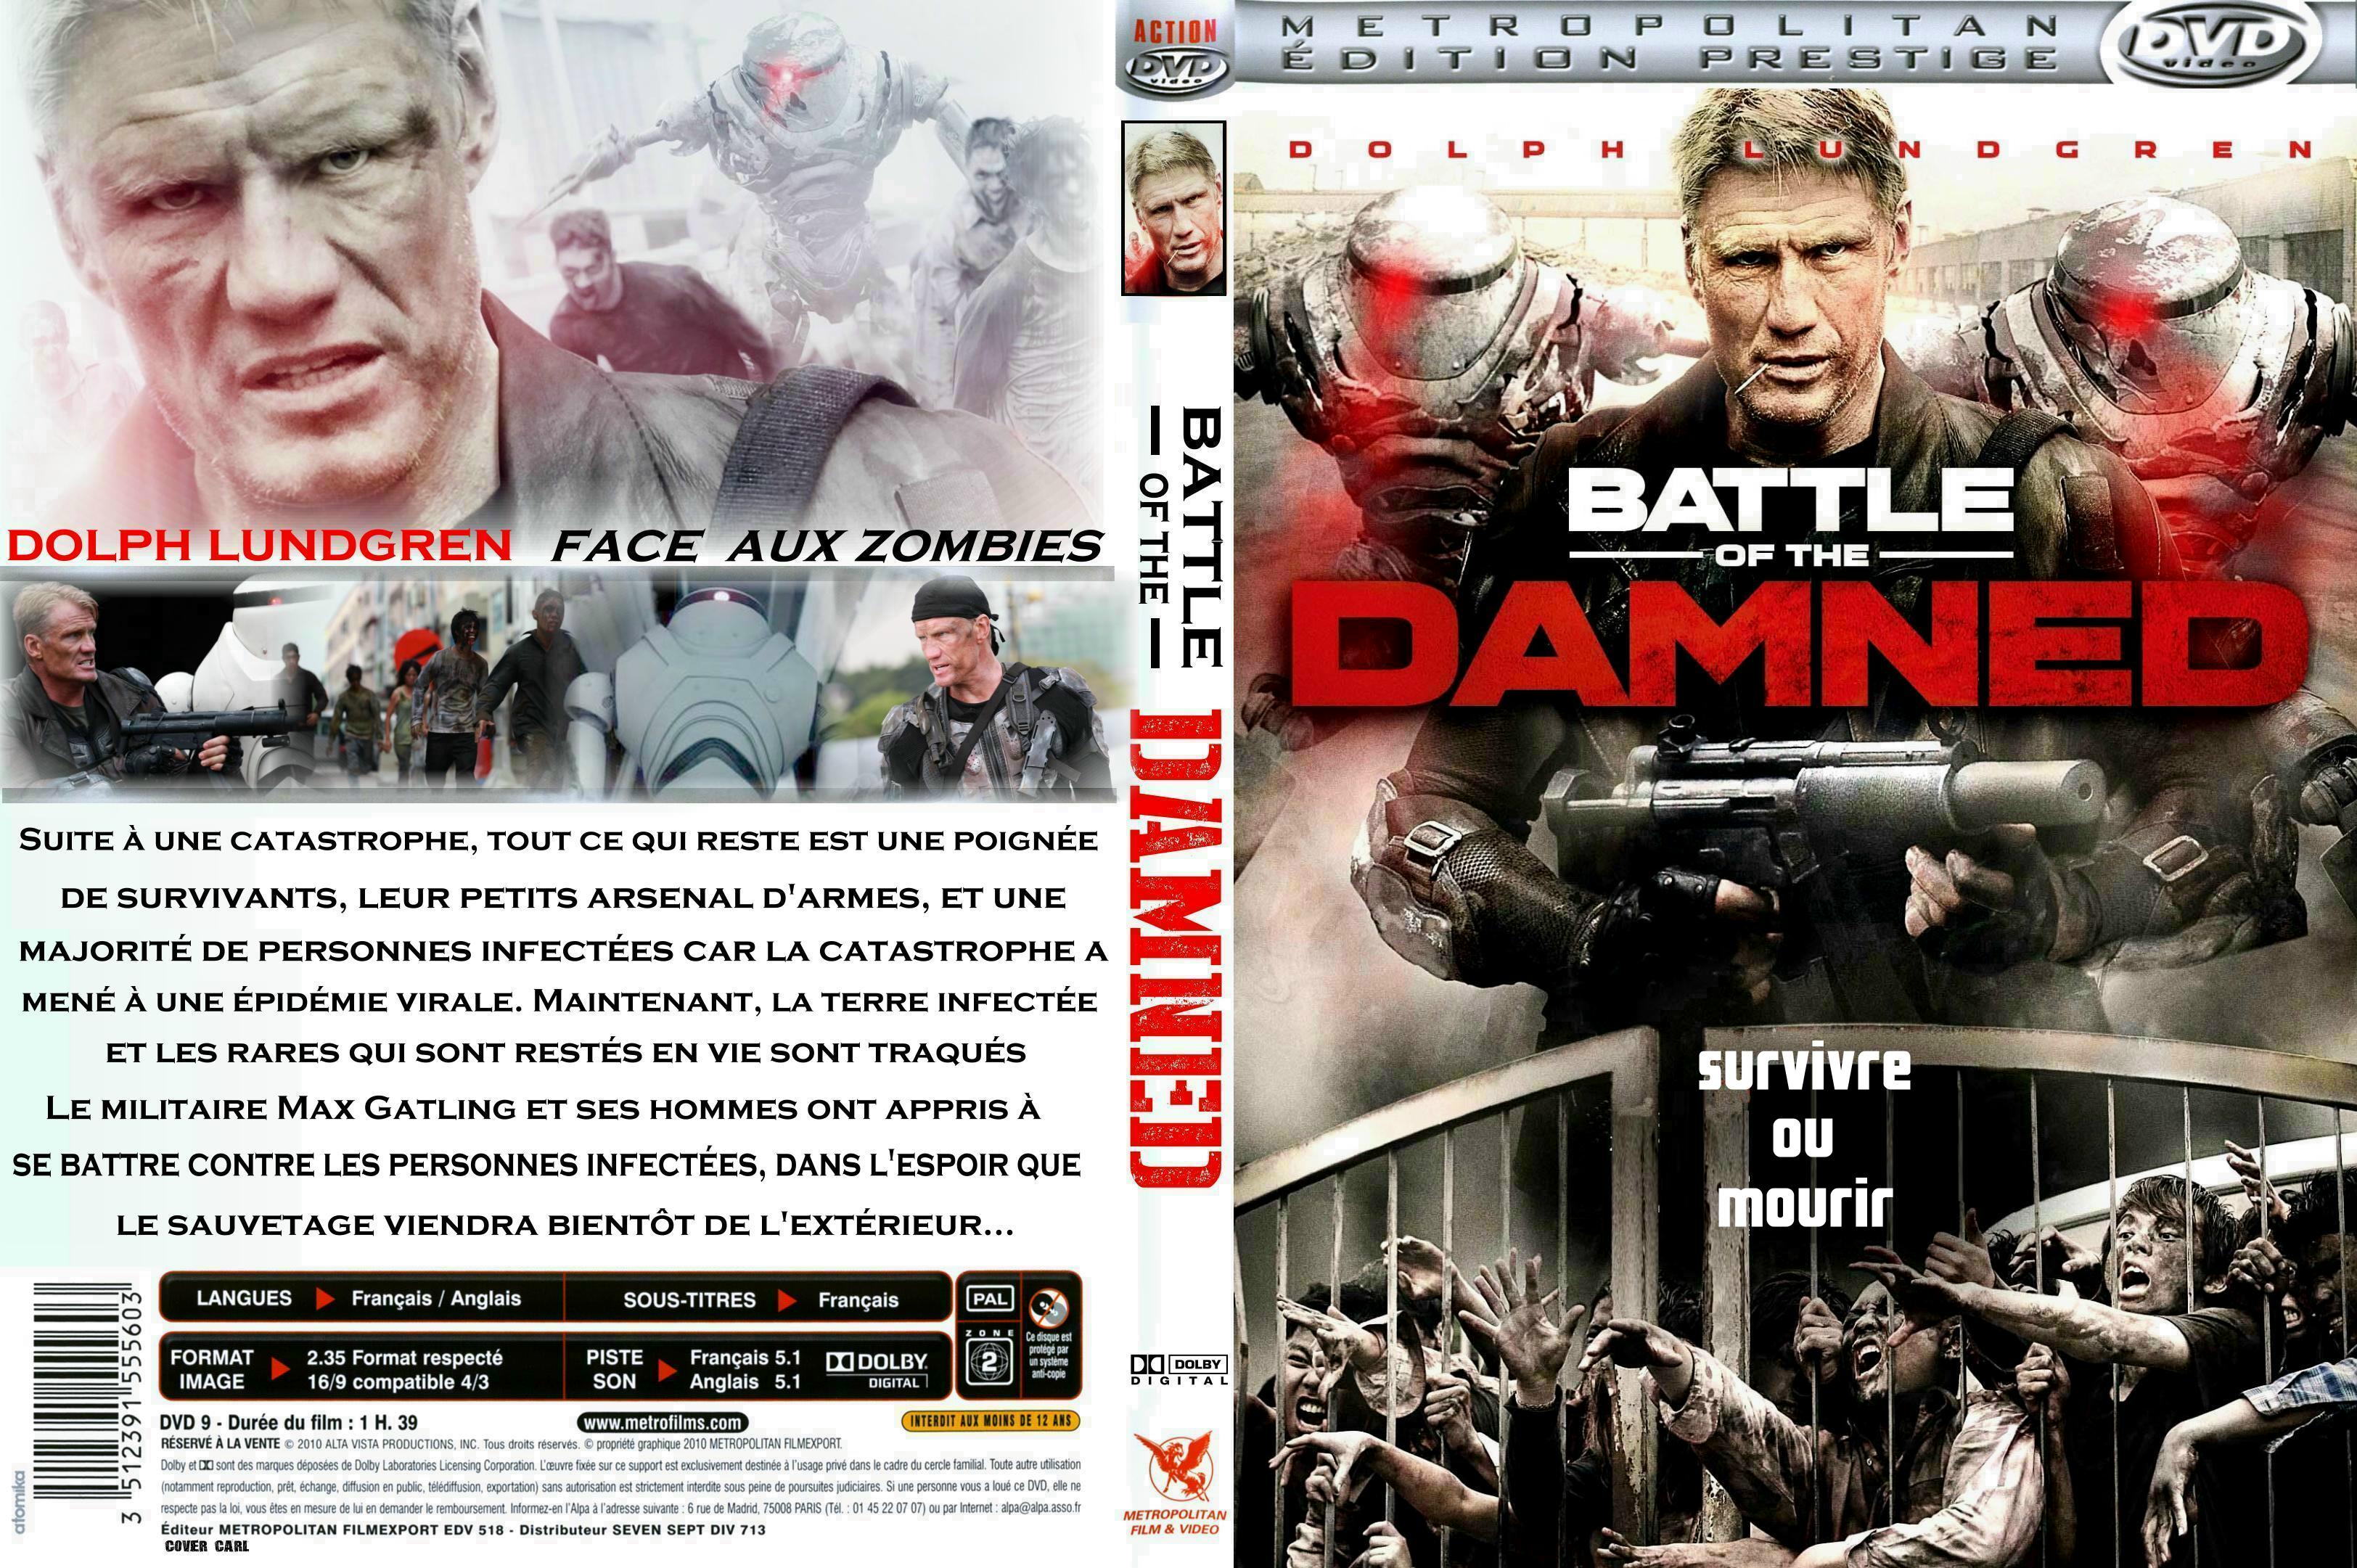 Jaquette DVD Battle of the Damned custom